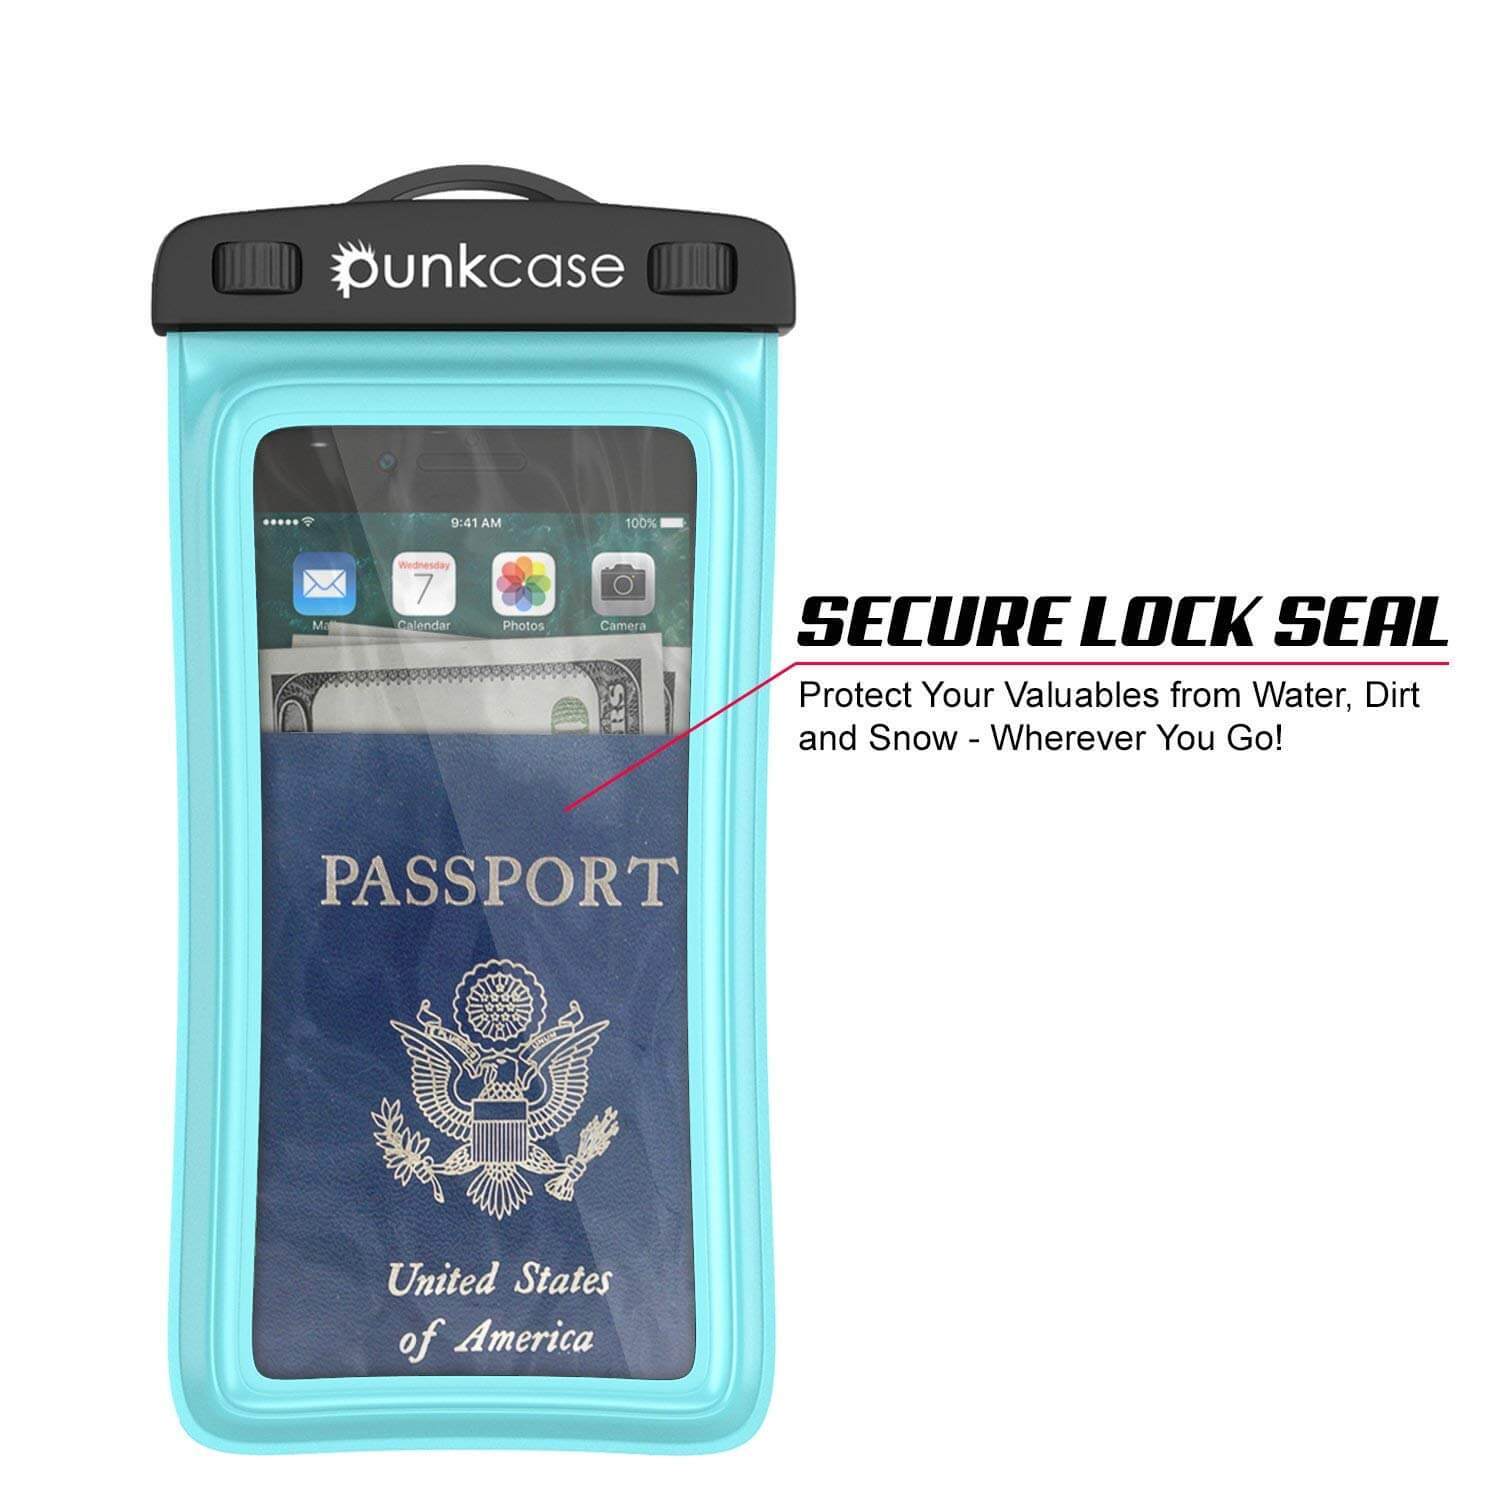 Waterproof Phone Pouch, PunkBag Universal Floating Dry Case Bag for most Cell Phones [Teal]